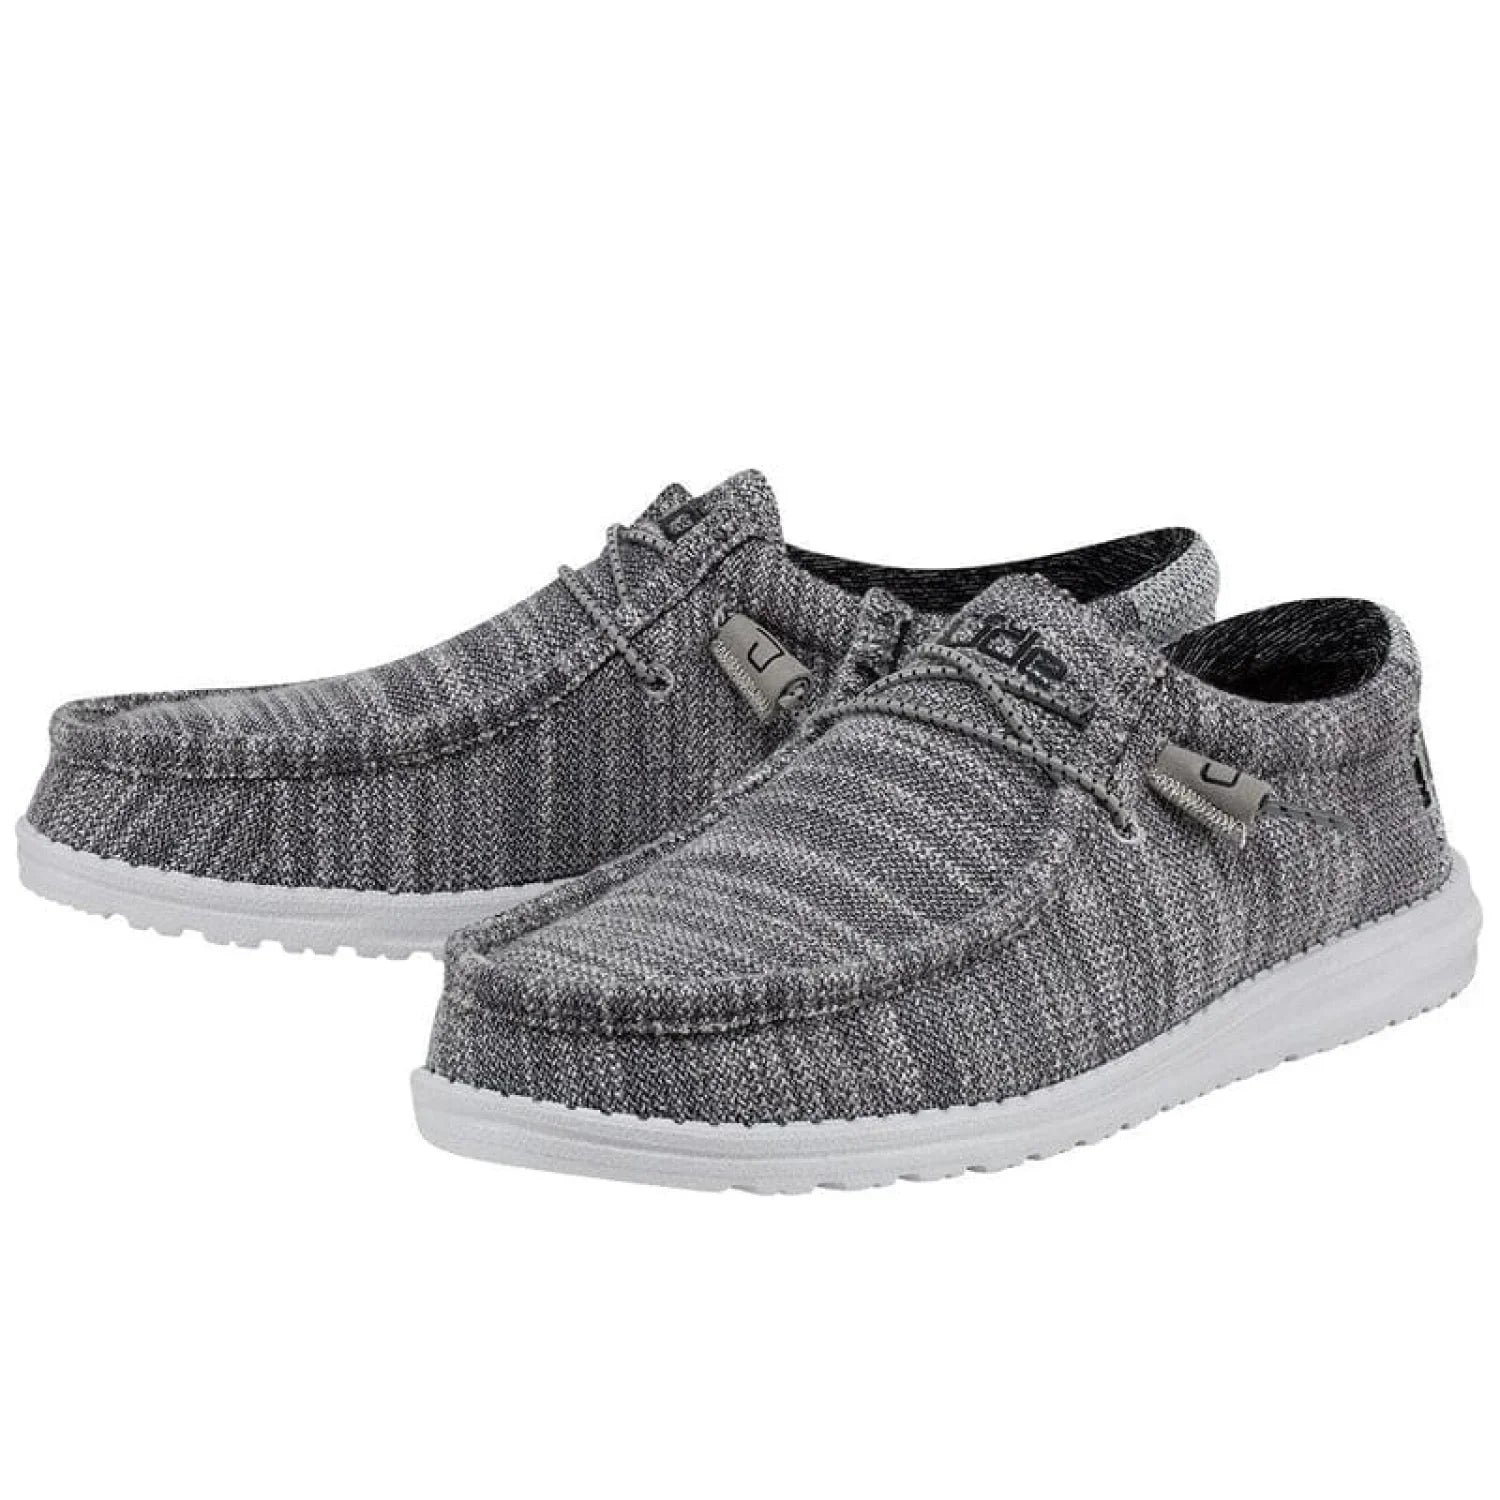 HEY DUDE MENS FOOTWEAR - MENS SHOES - MENS SHOES CASUAL Wally Stretch Mix GRANITE